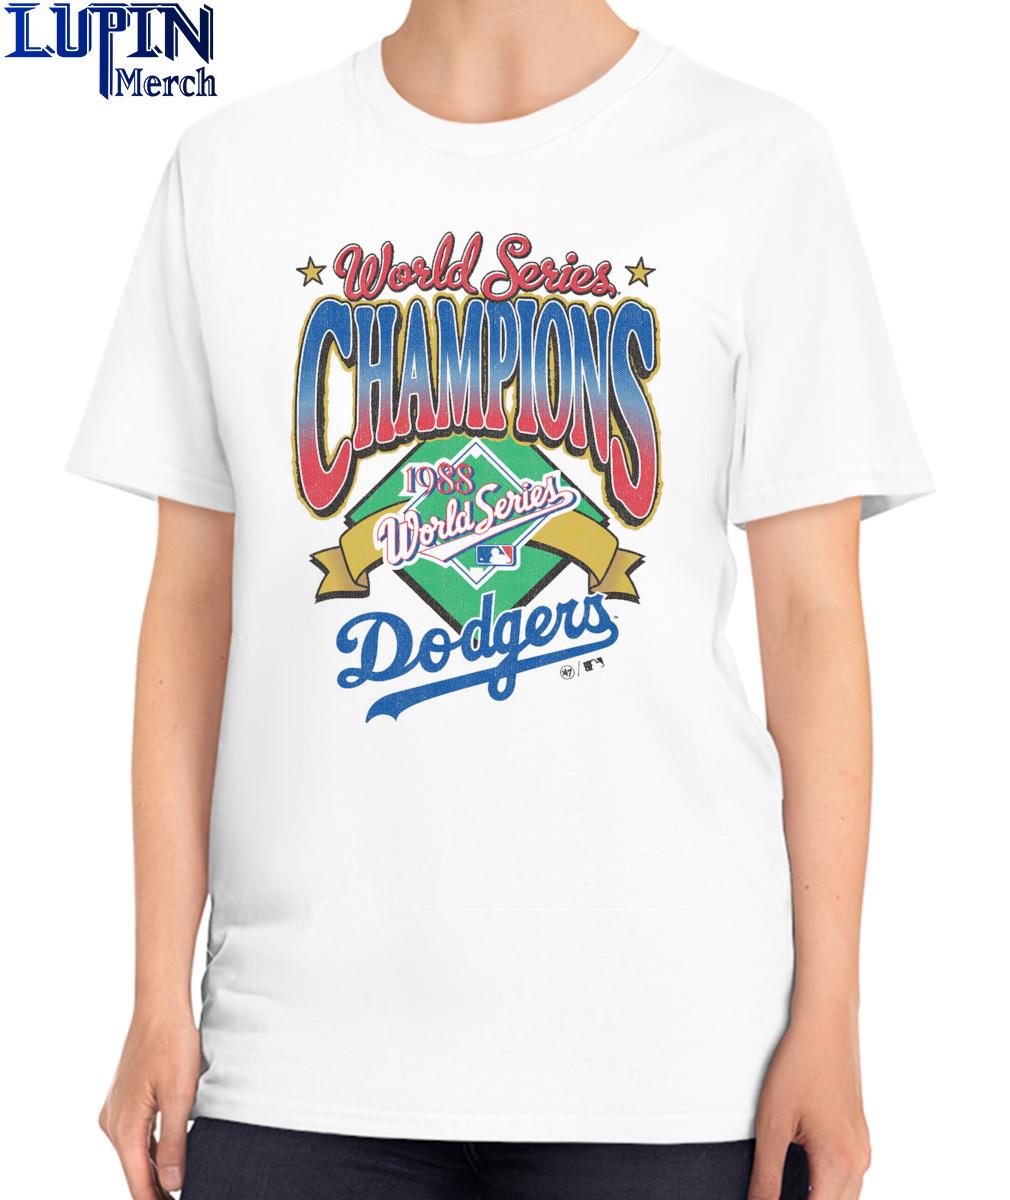 Official Los Angeles Dodgers '47 Women's 1988 World Series